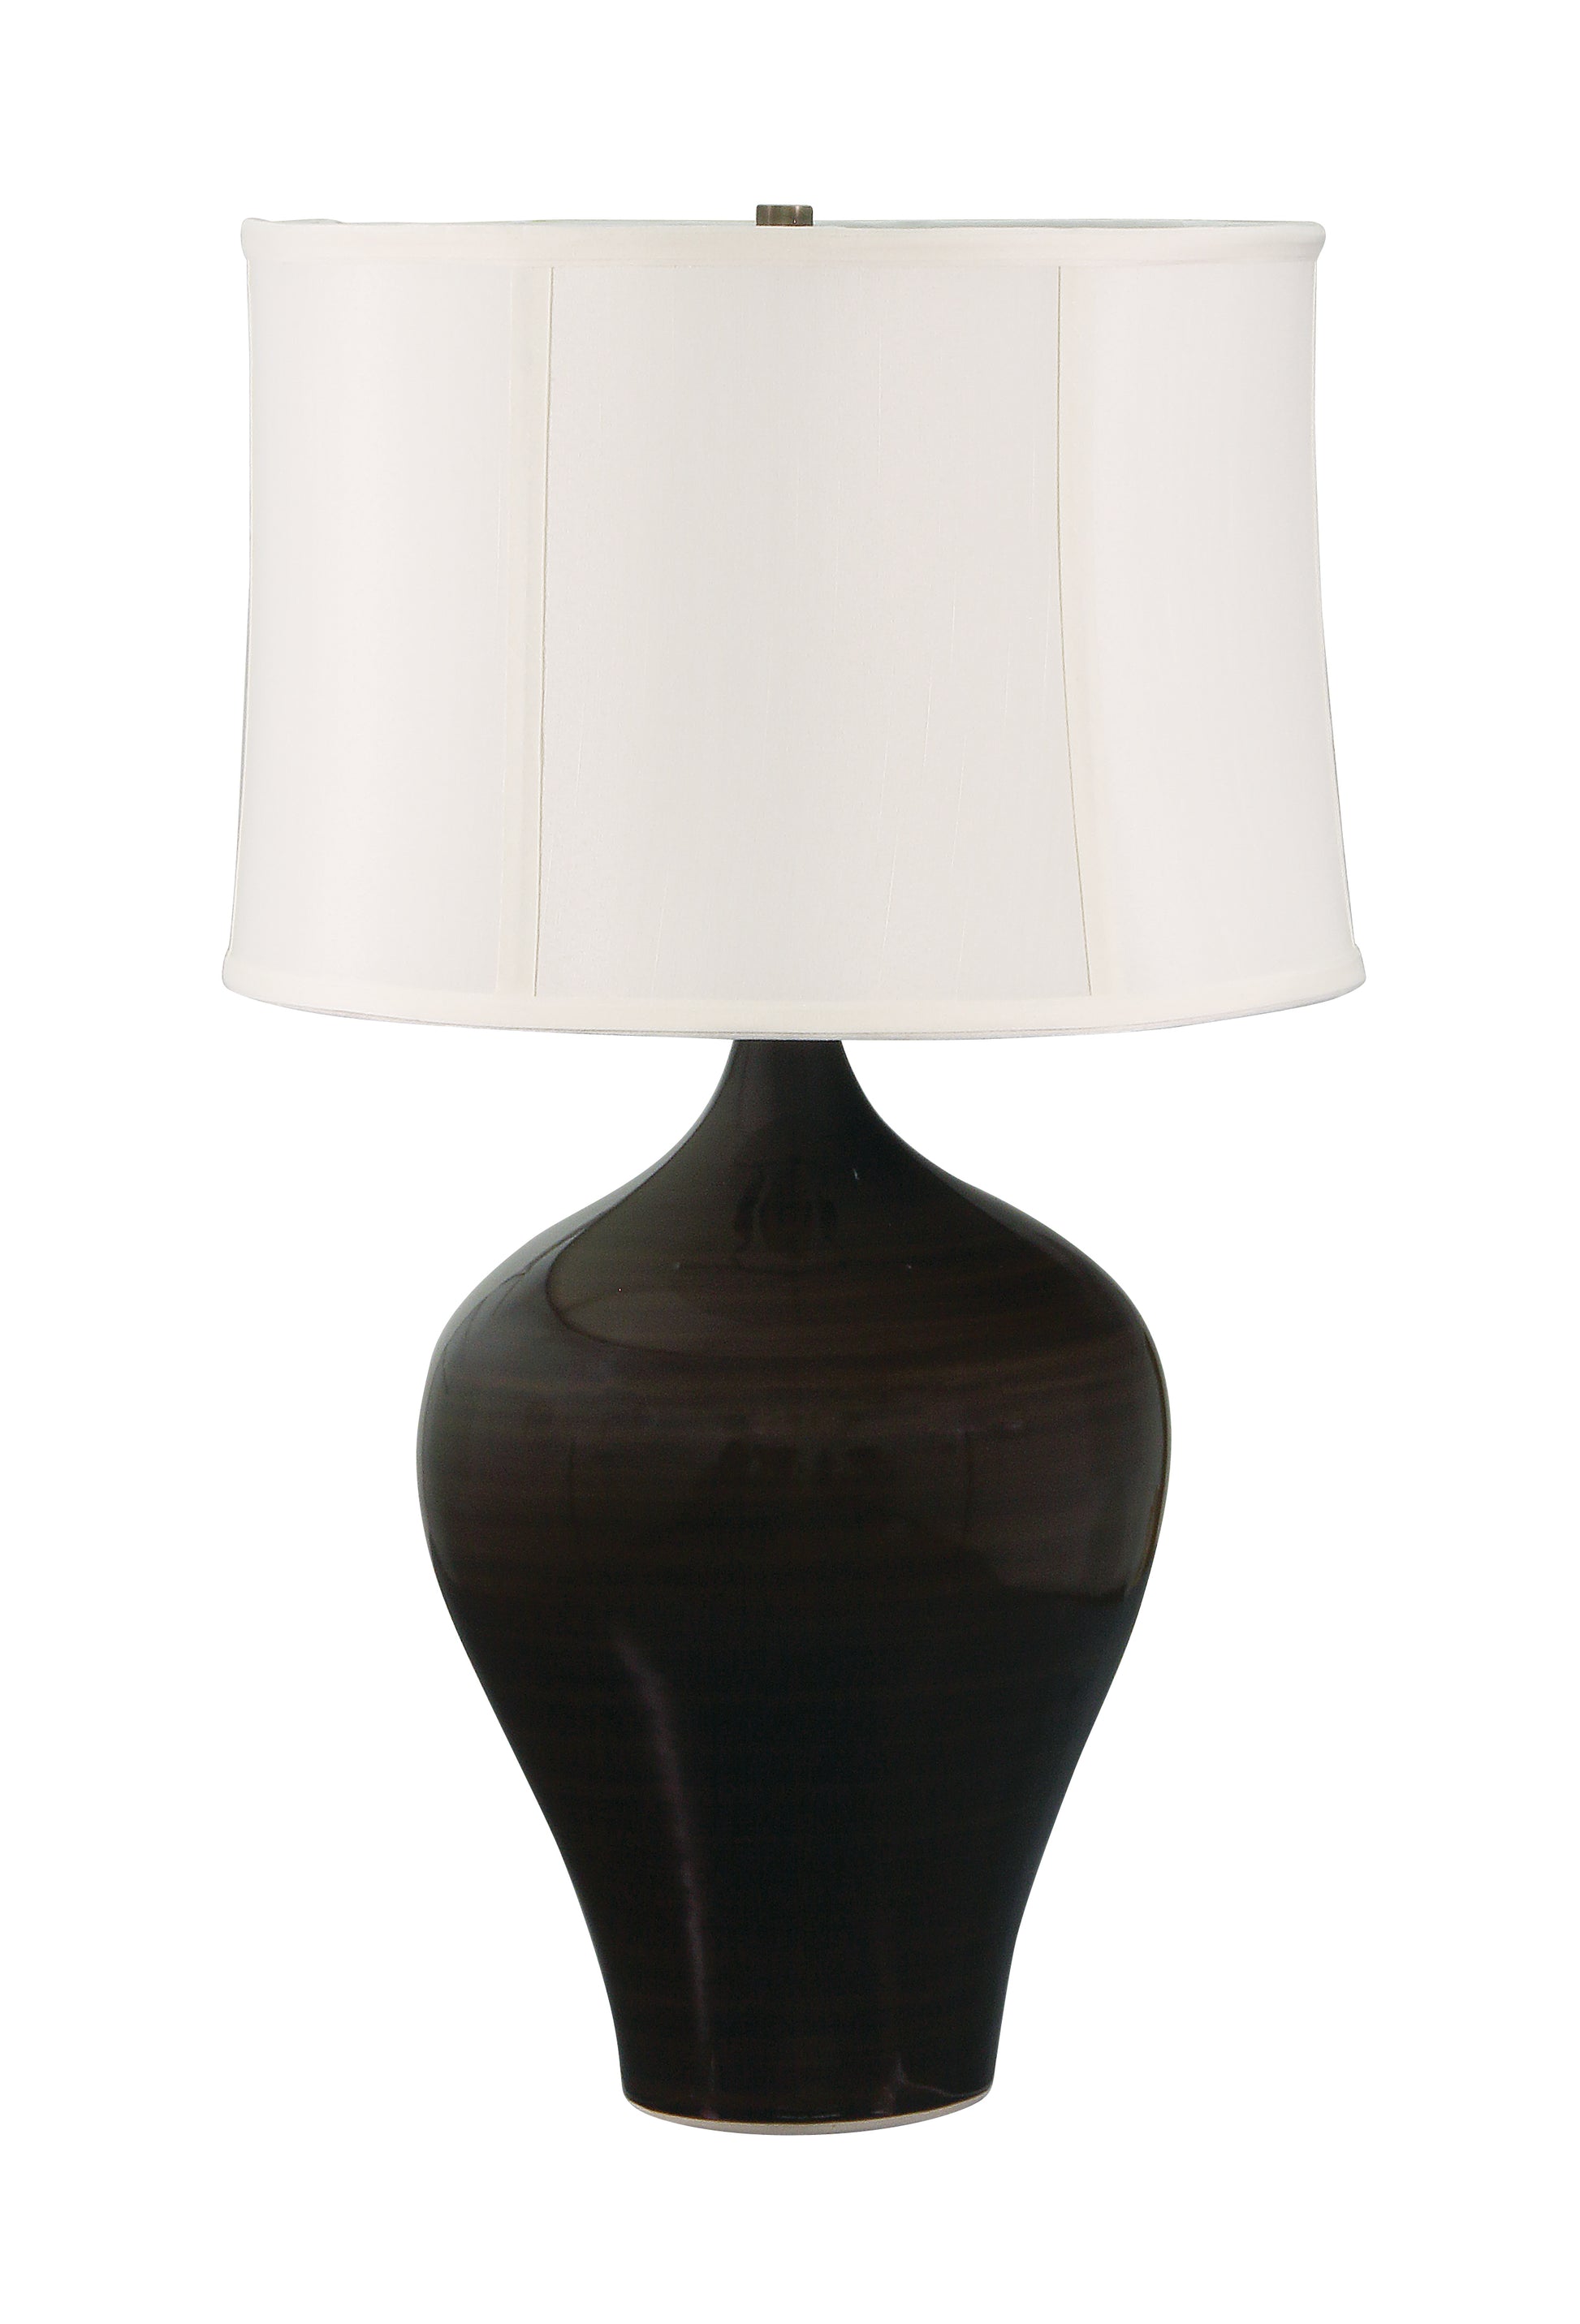 House of Troy Scatchard 25" Stoneware Table Lamp Brown Gloss GS160-BR